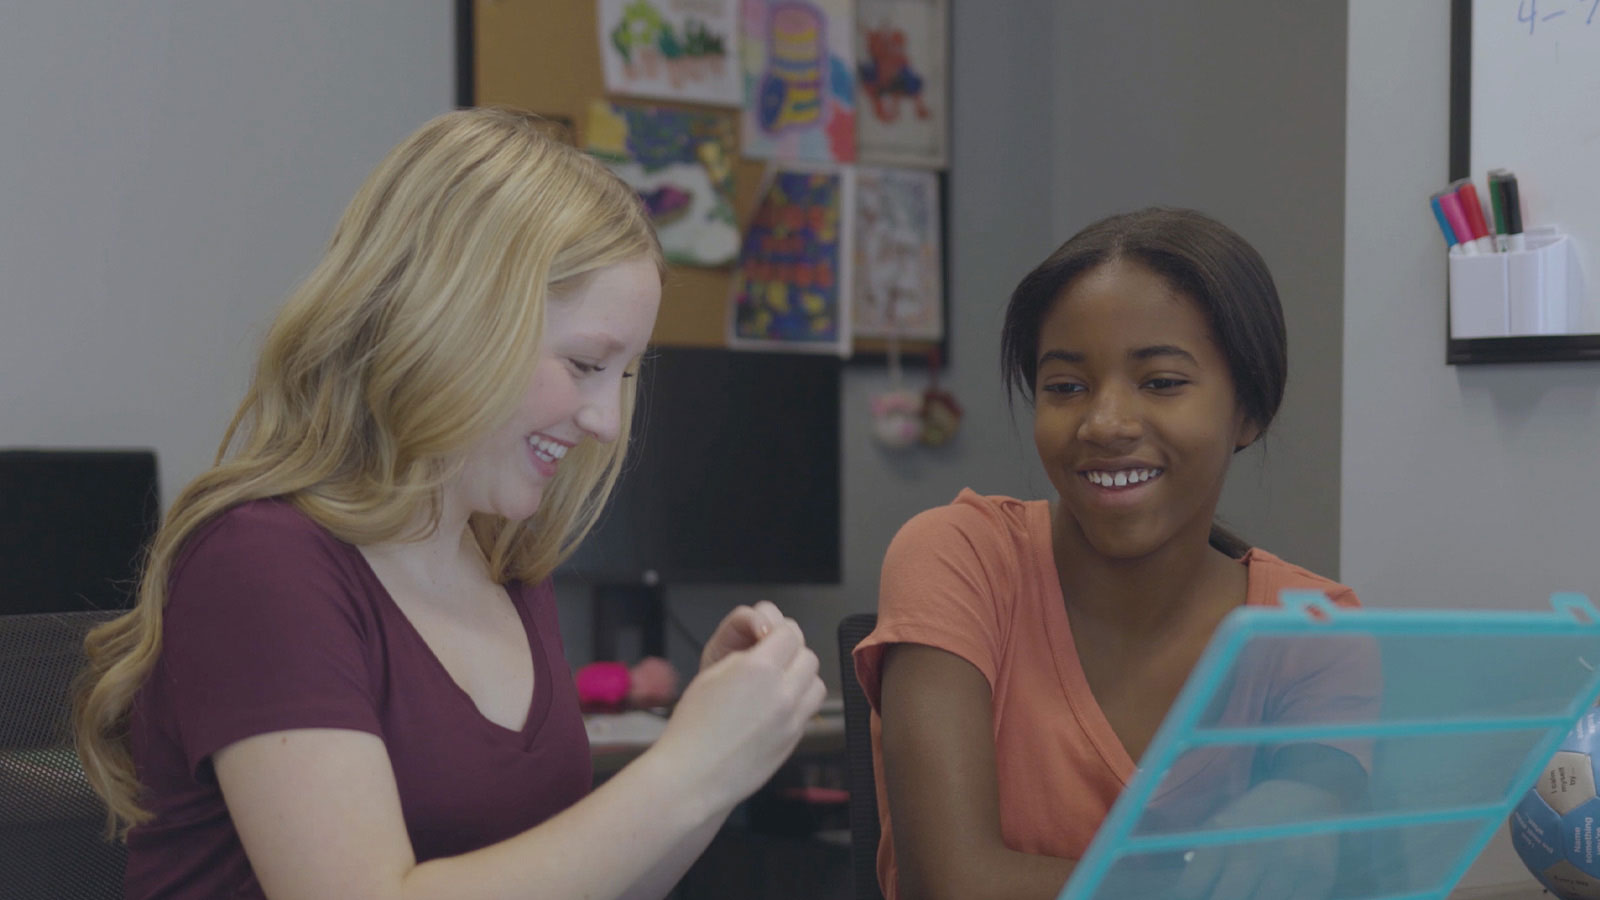 Two teenage females smiling and interacting over a learning activity in a therapy session.